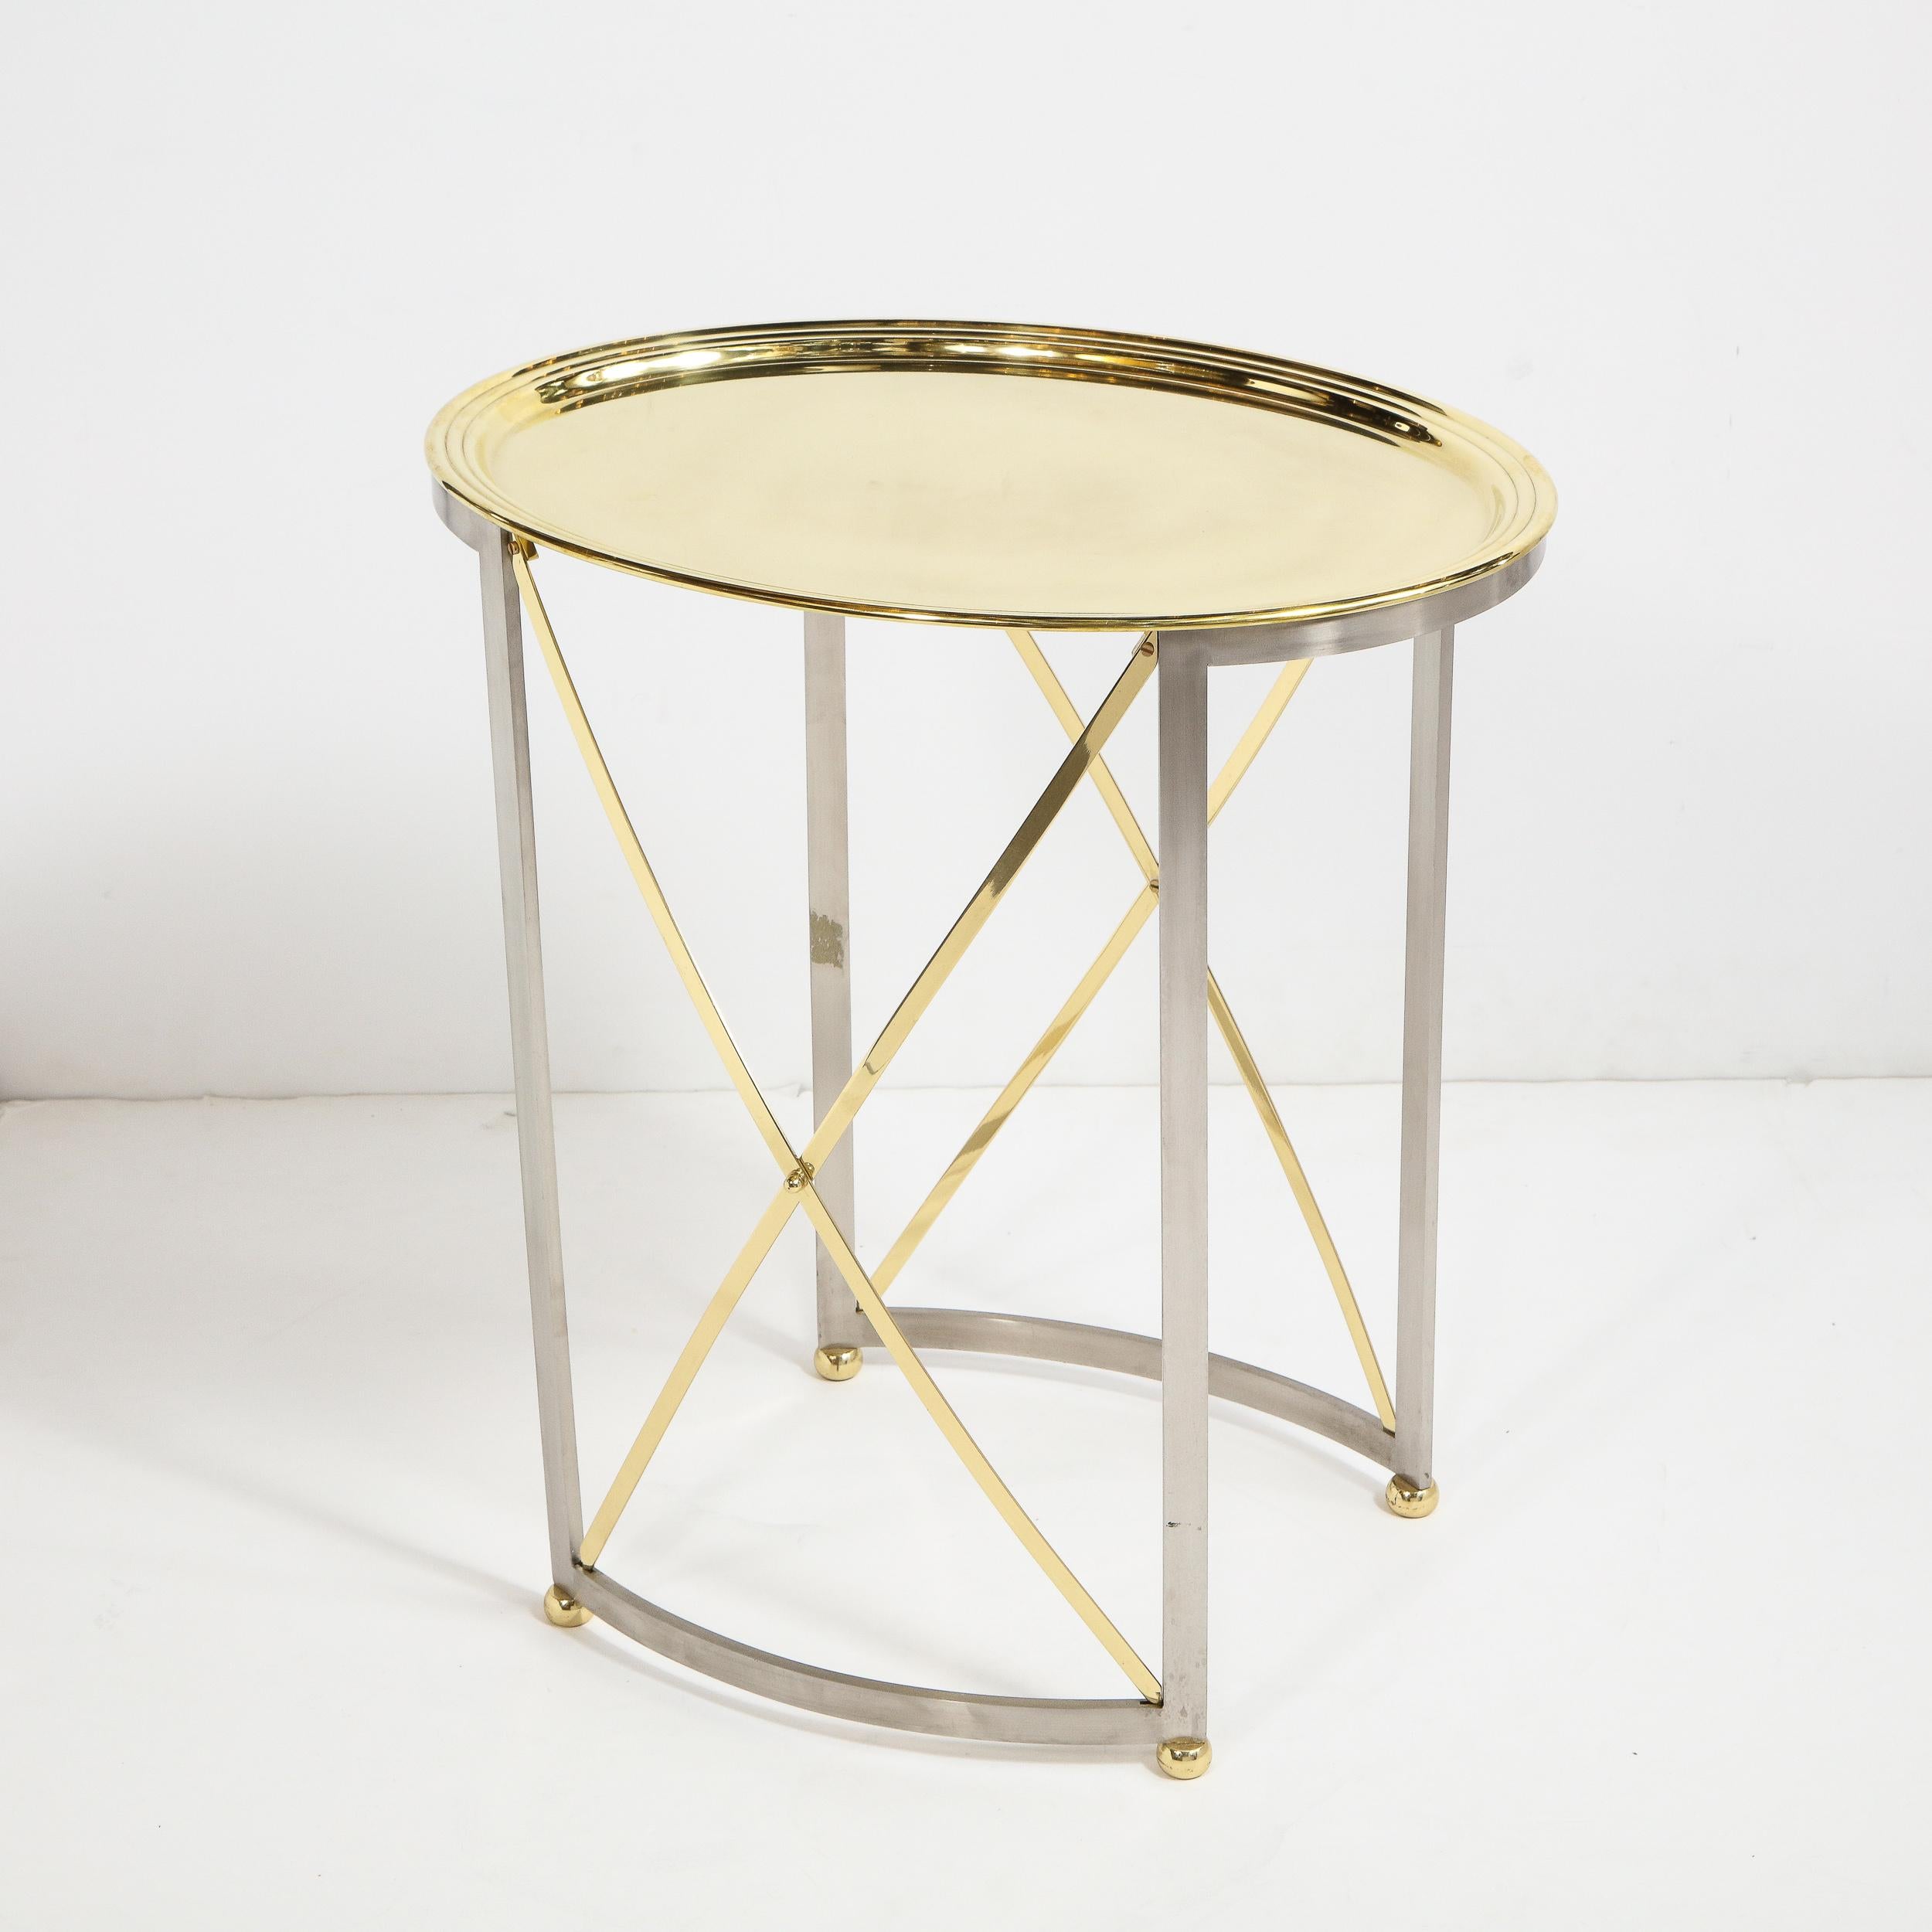 This chic and bold Mid-Century Modern occasional/ side table was realized in France, circa 1980 by the celebrated maker Maison Jansen. It features two brushed nickel legs on each side connected a curved concave band at the bottom and X-form brass